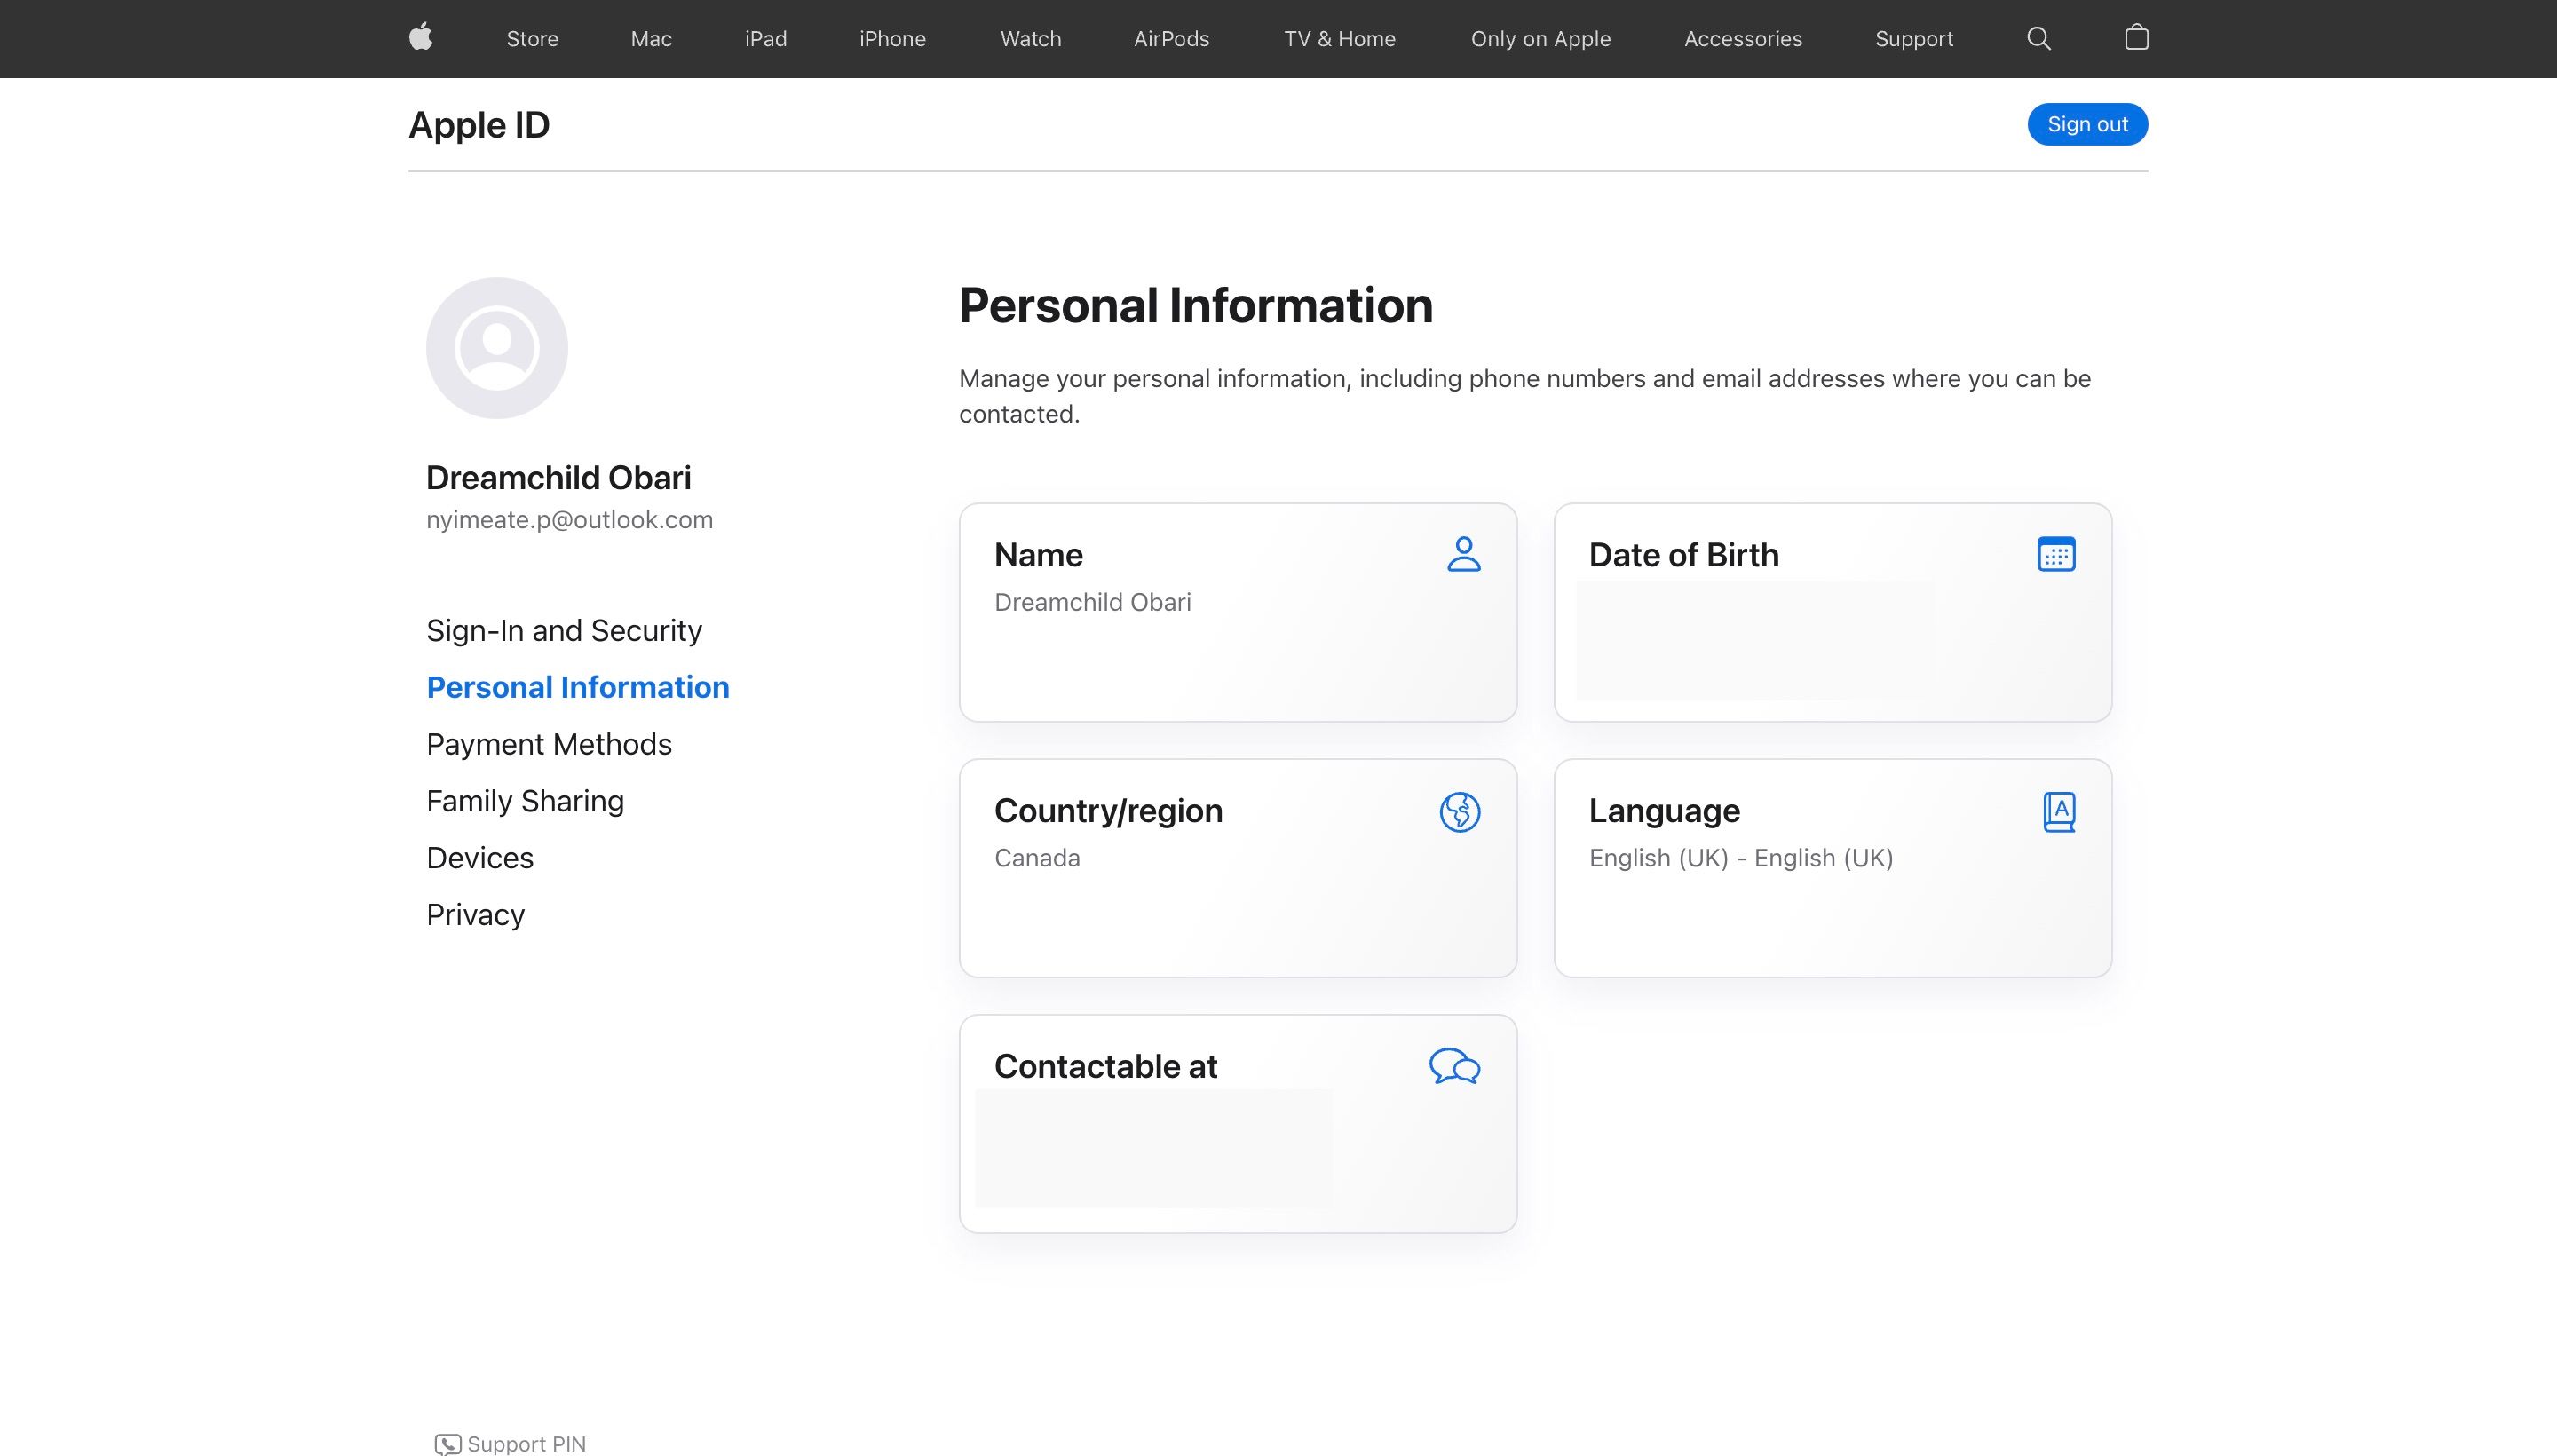 Dreamchild's Apple ID personal information page on the Apple ID website